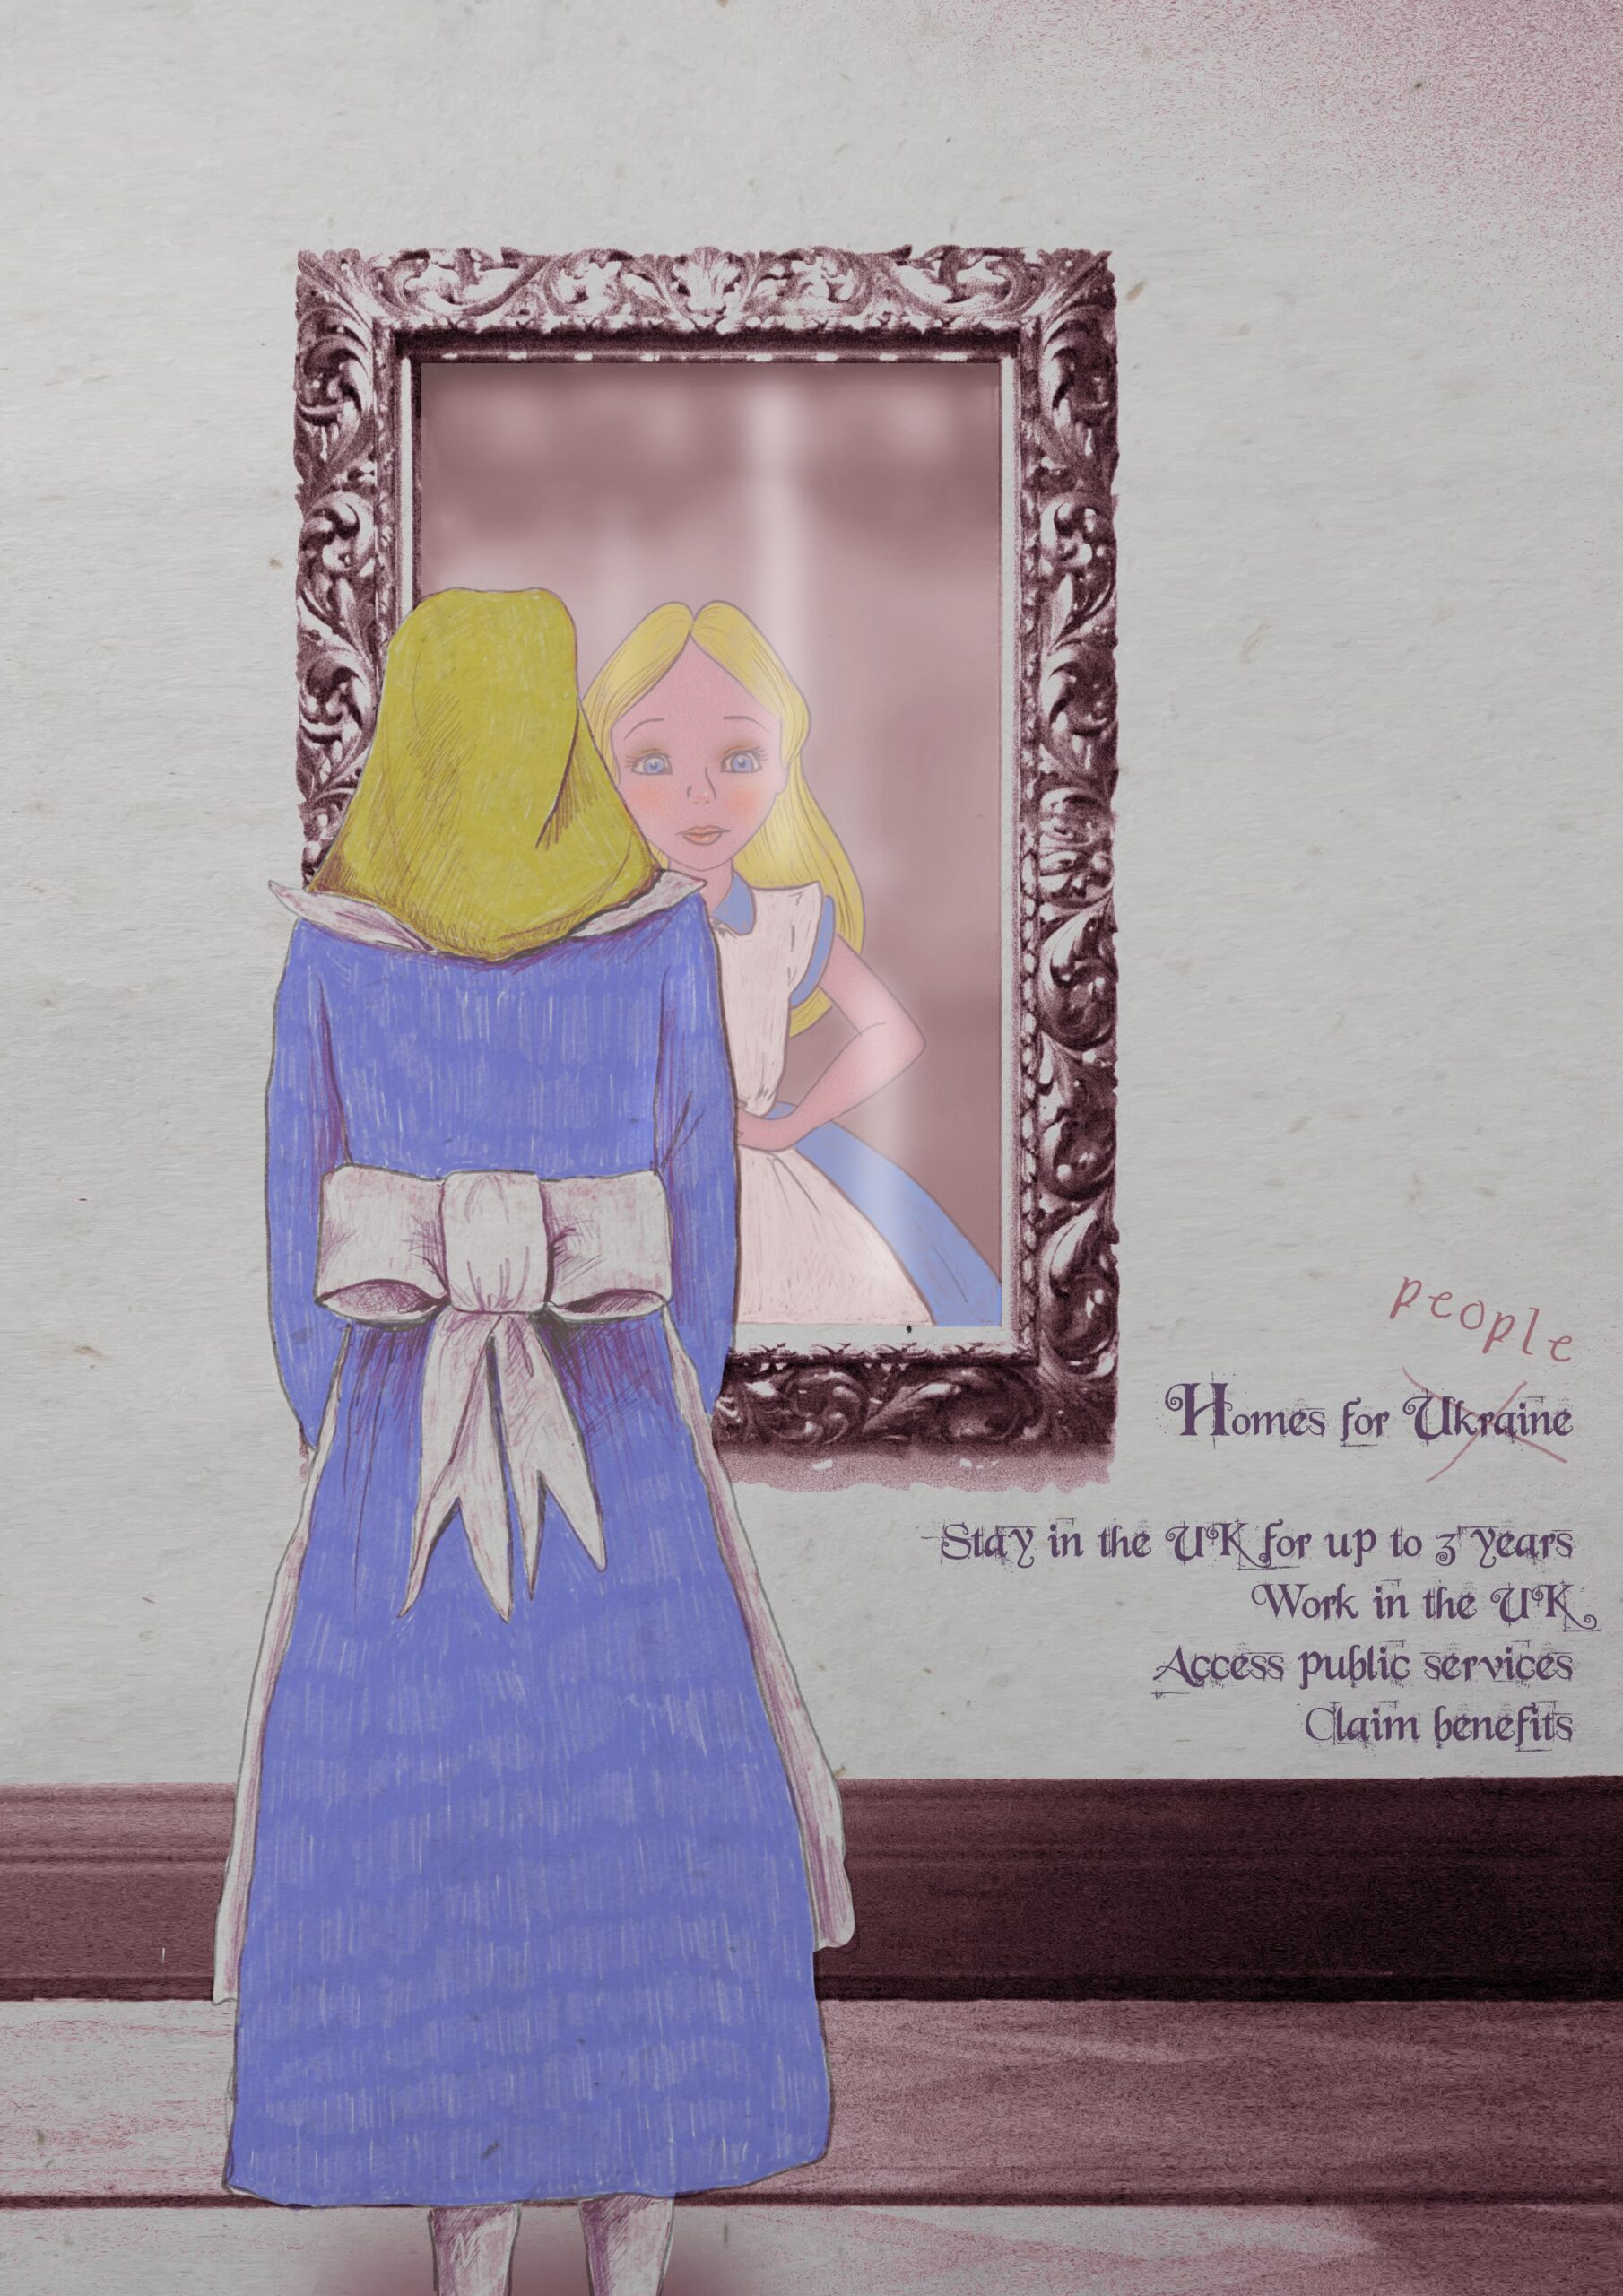 Alice looks into the mirror, a white Alice looks back. The text reads Homes for Ukraine. Ukraine is crossed out and replaced with people. Stay in the UK for up to 3 years, work in the UK, access public services, claim benefits.